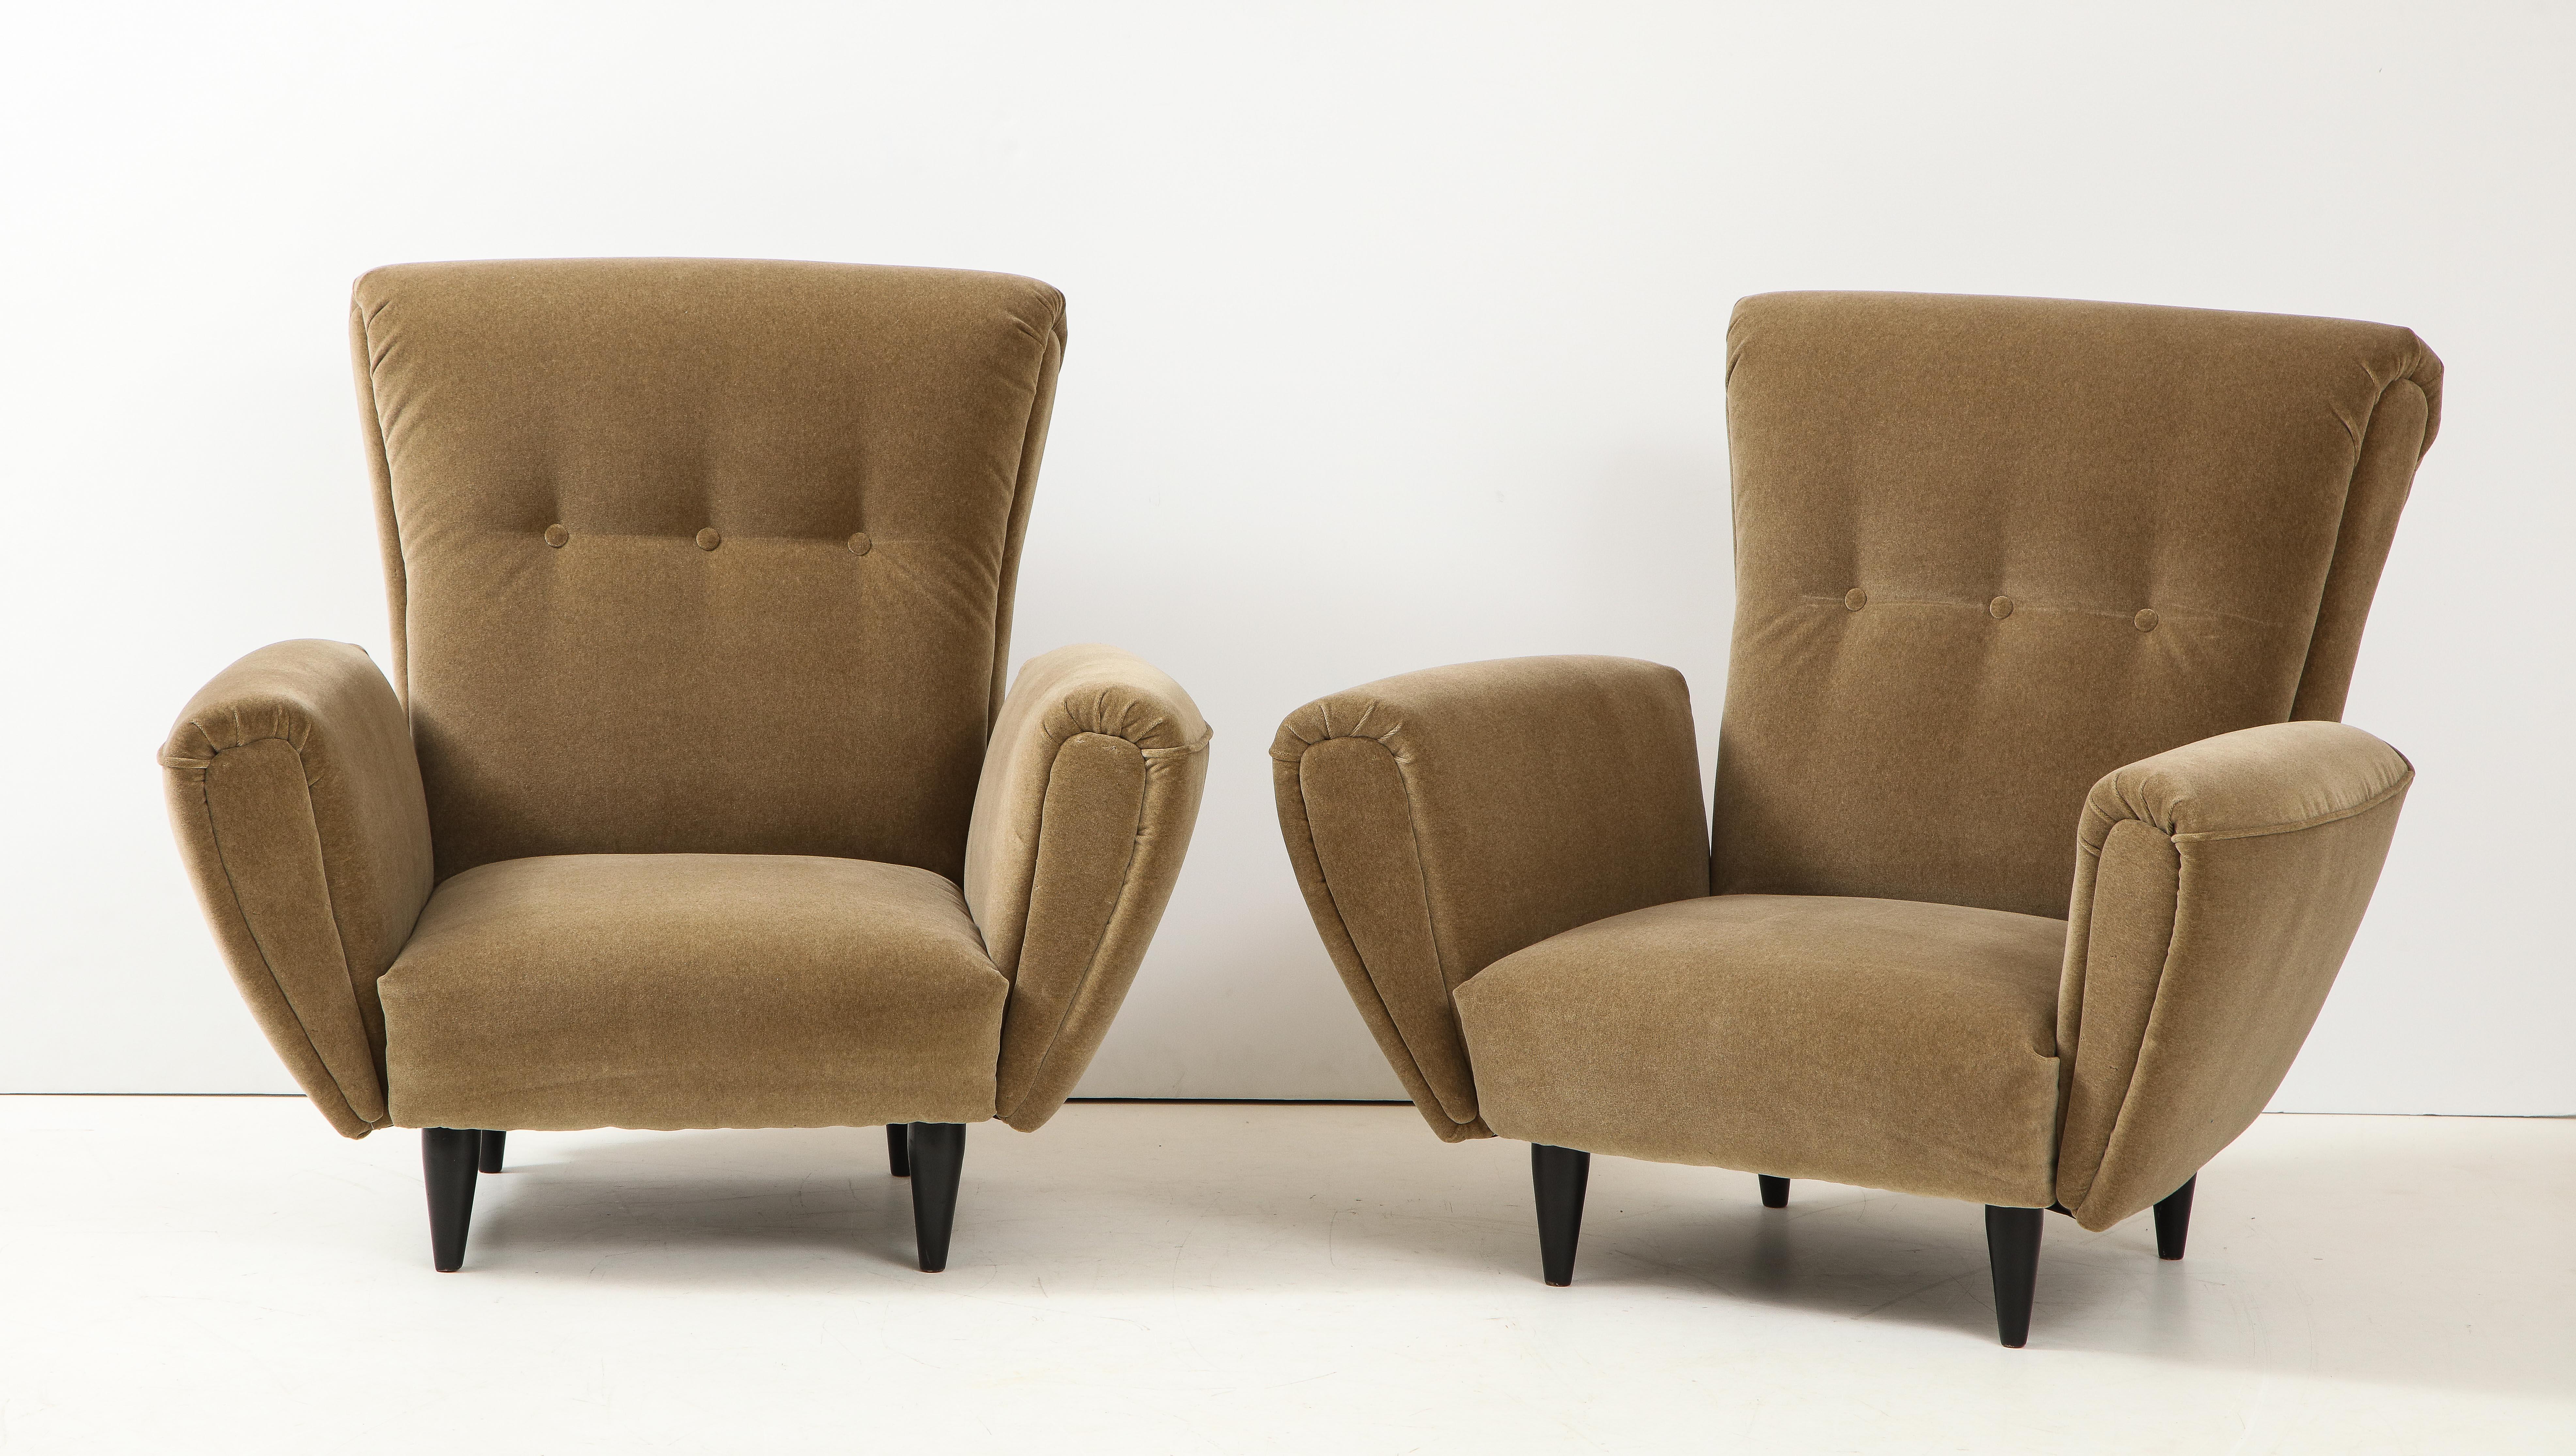 Stunning pair of large 1940's Art Deco Italian chairs newly reupholstered in Donghia mohair fabric, fully restored and ready to use.